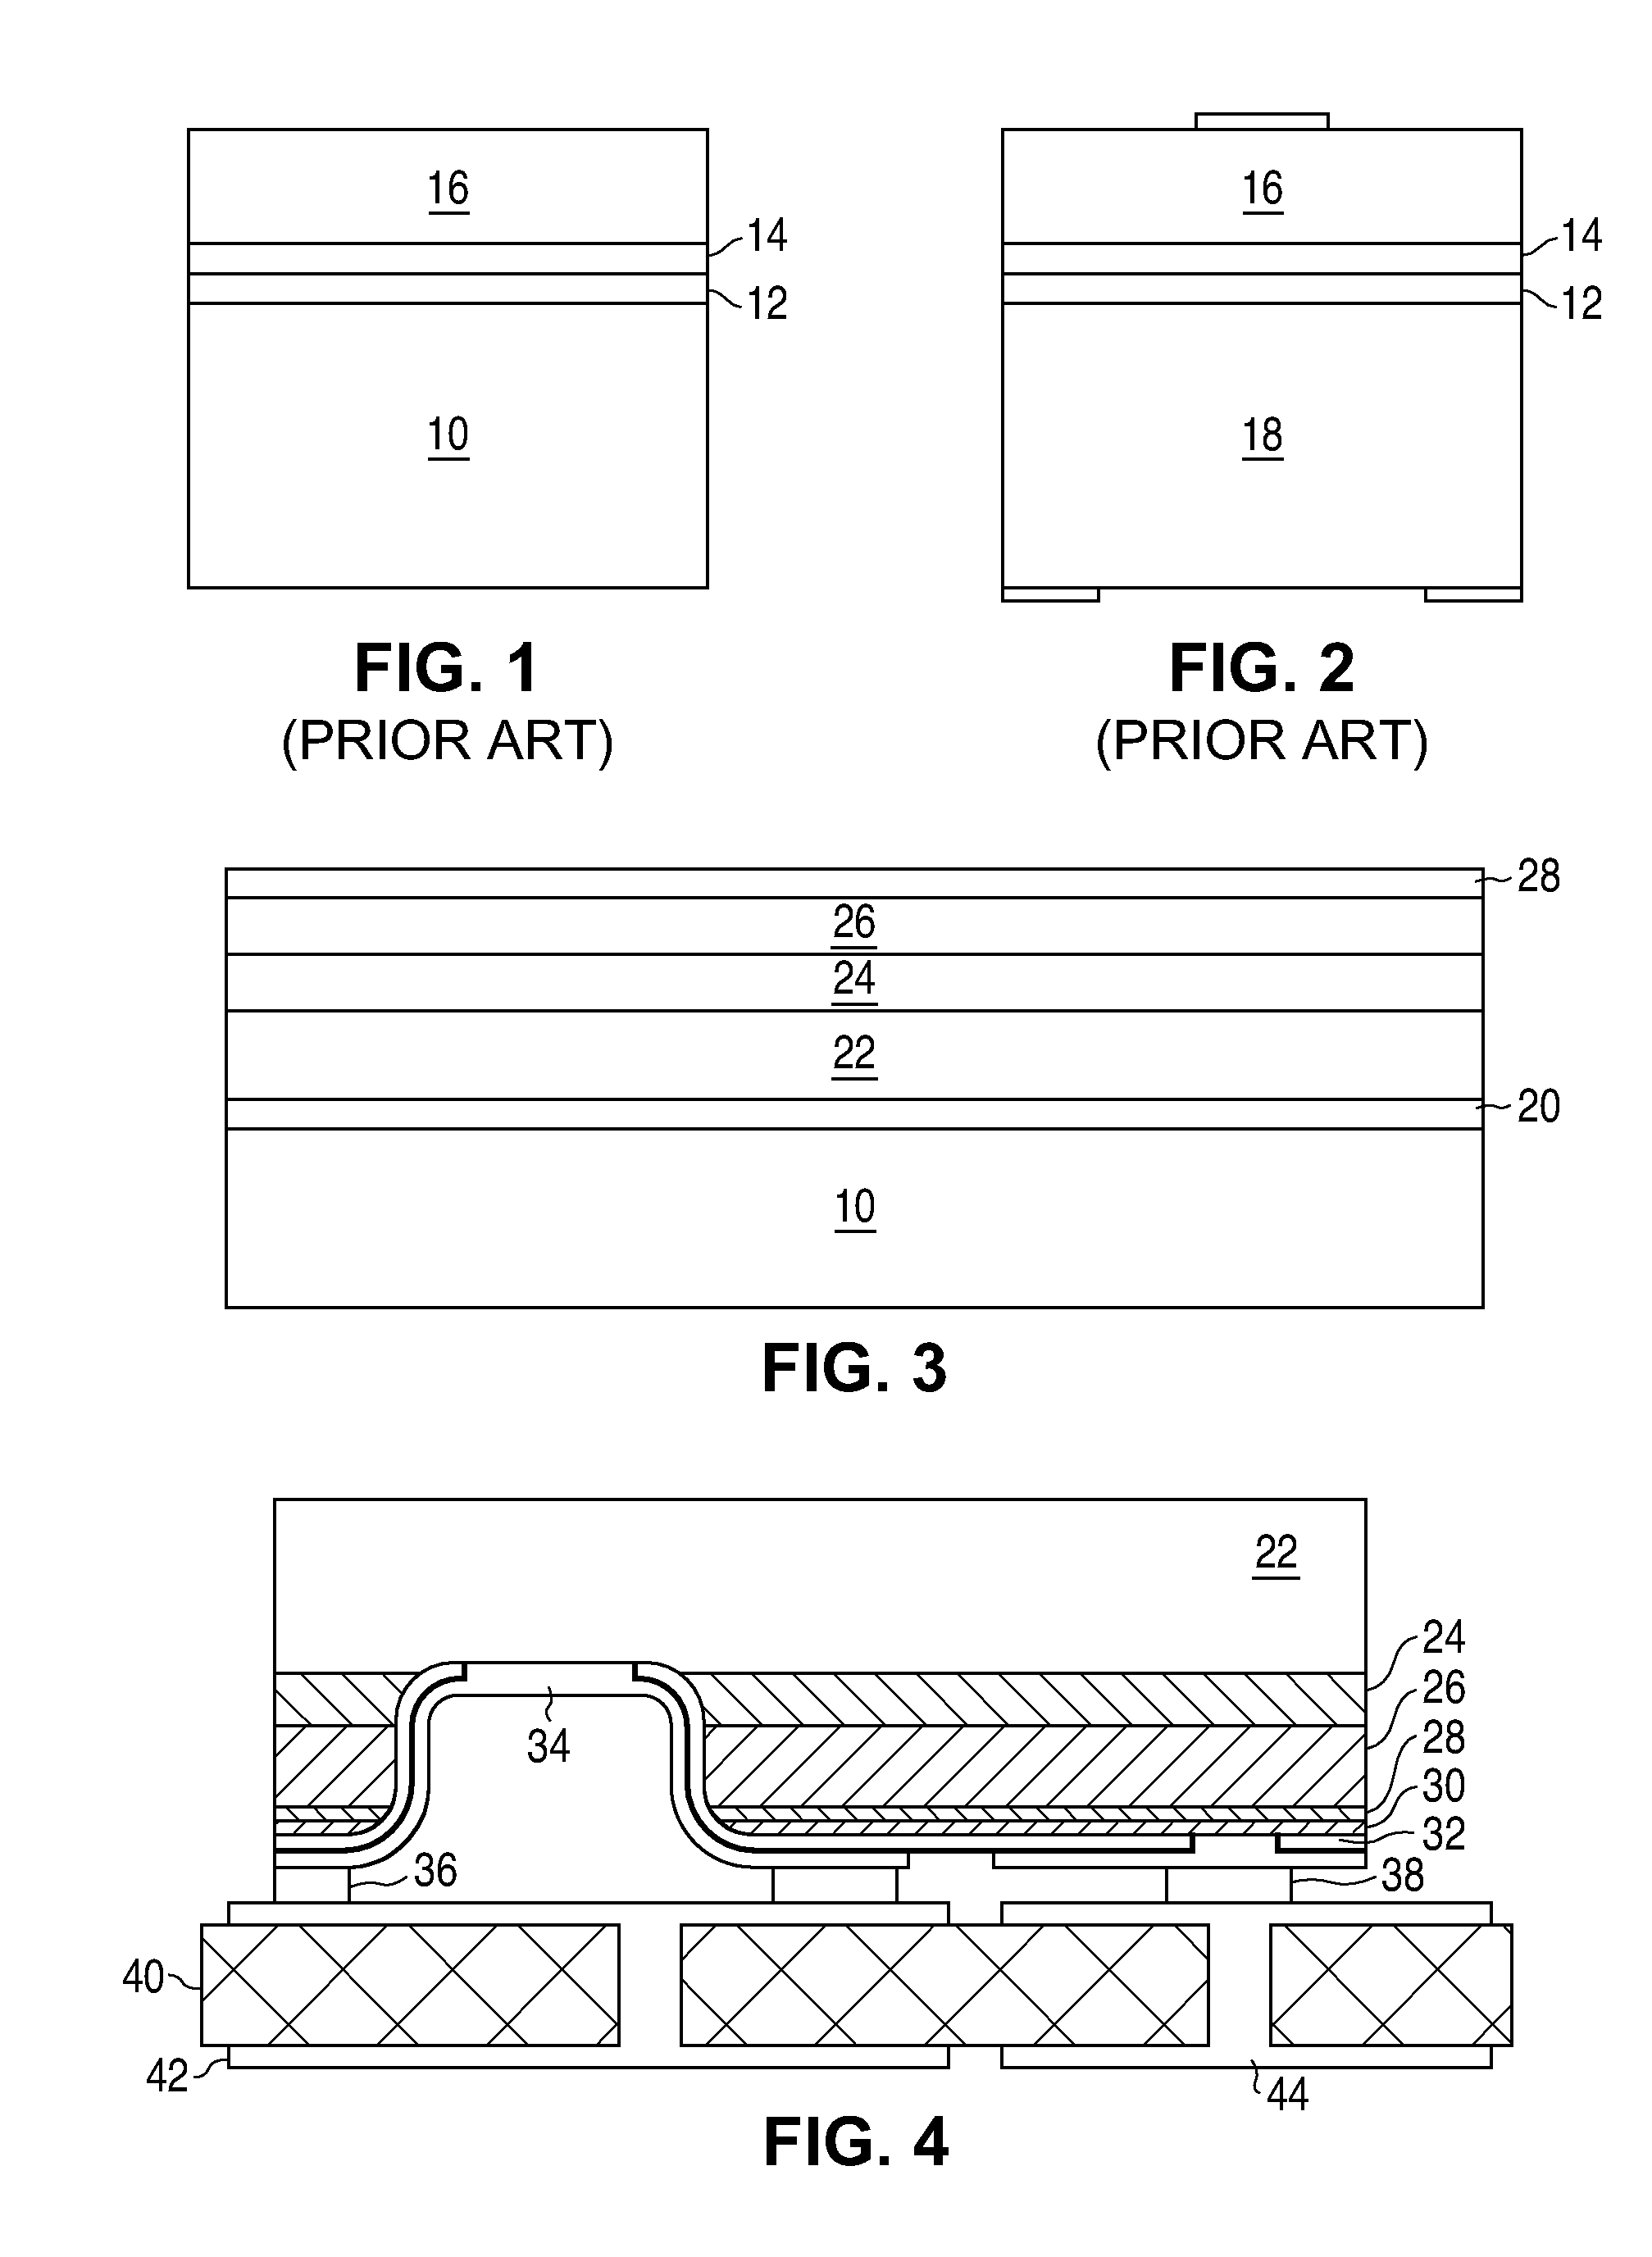 Contact for a semiconductor light emitting device